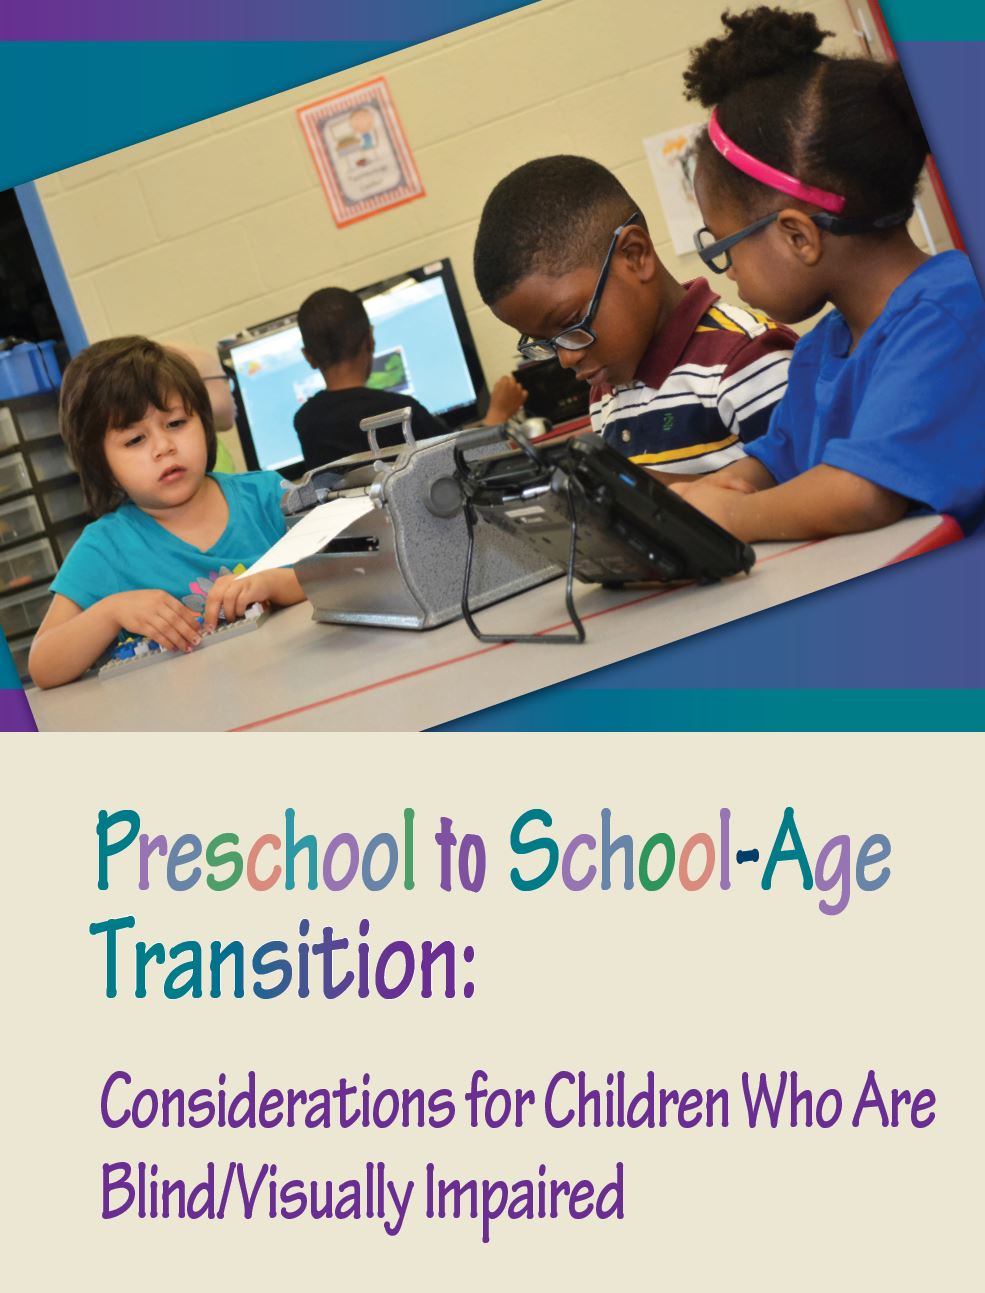 Preschool to School-Age Transition: Considerations for Children Who Are Blind/Visually Impaired